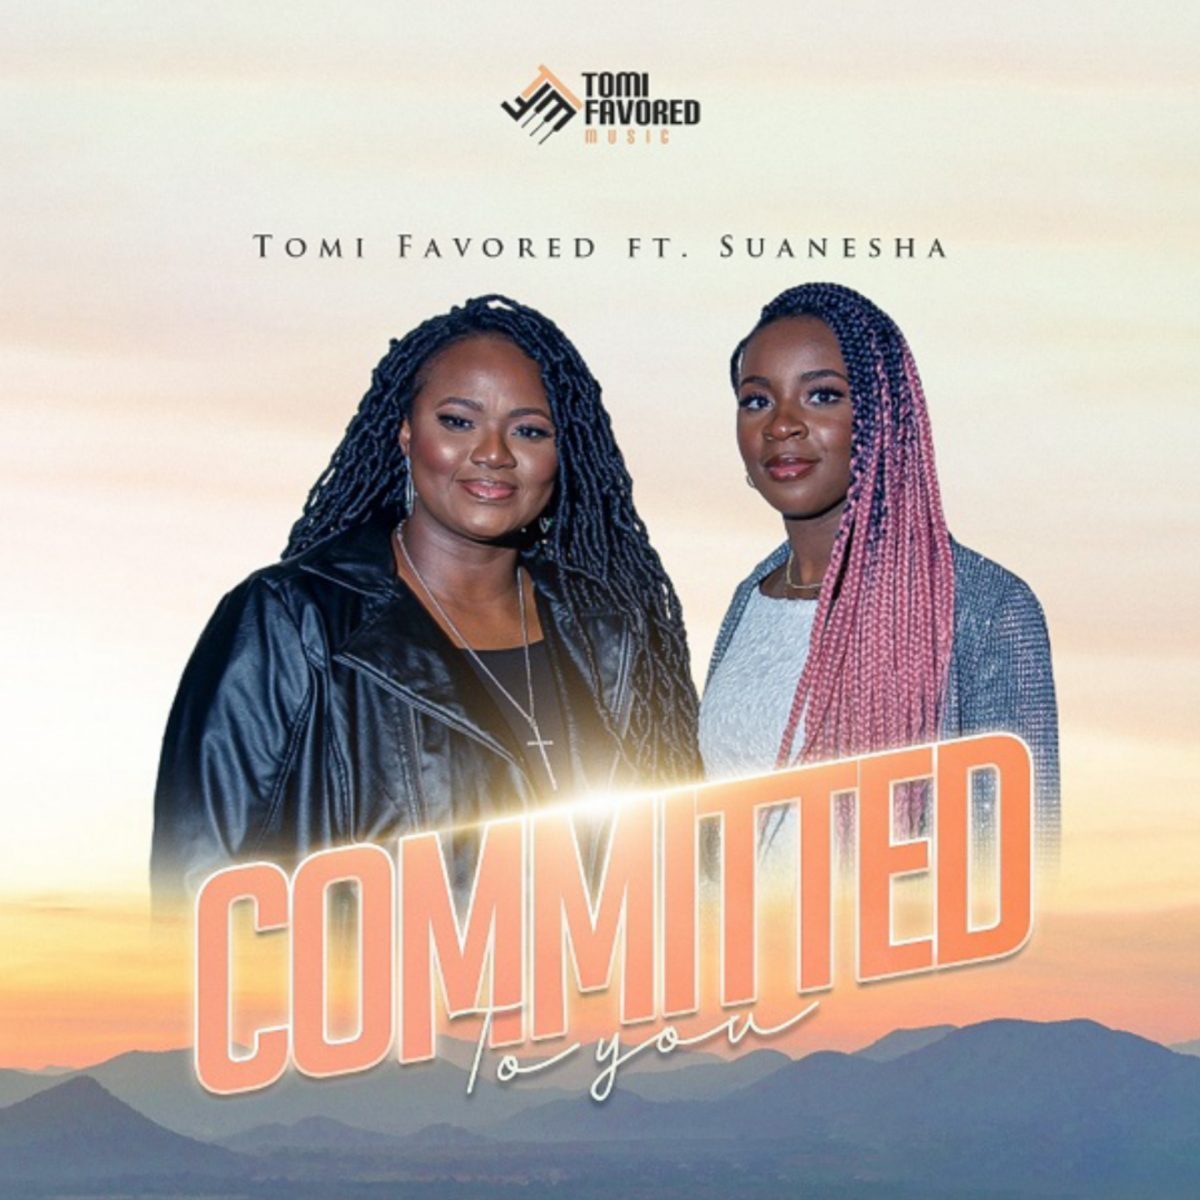 Tomi Favored Ft. Suanesha